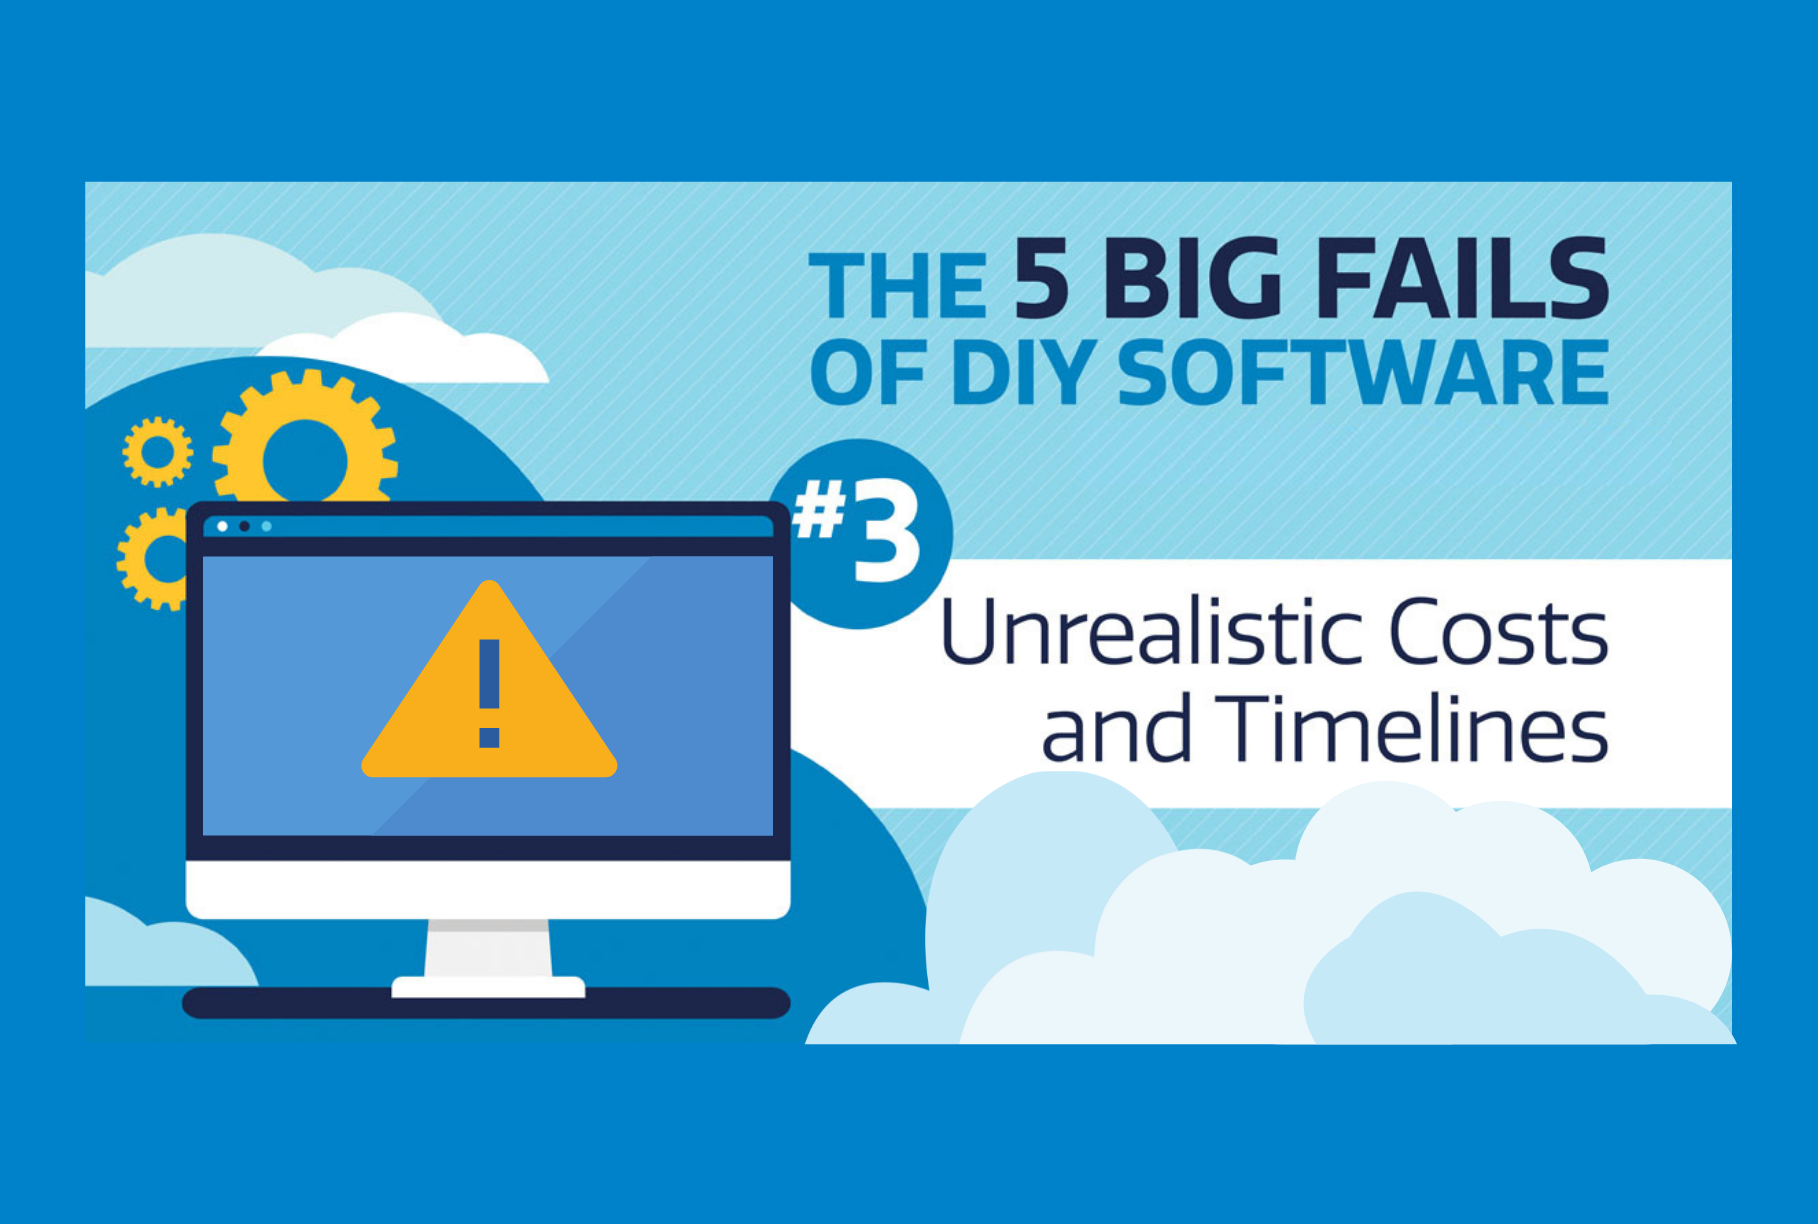 Big Fail #3: Unrealistic Costs and Timelines